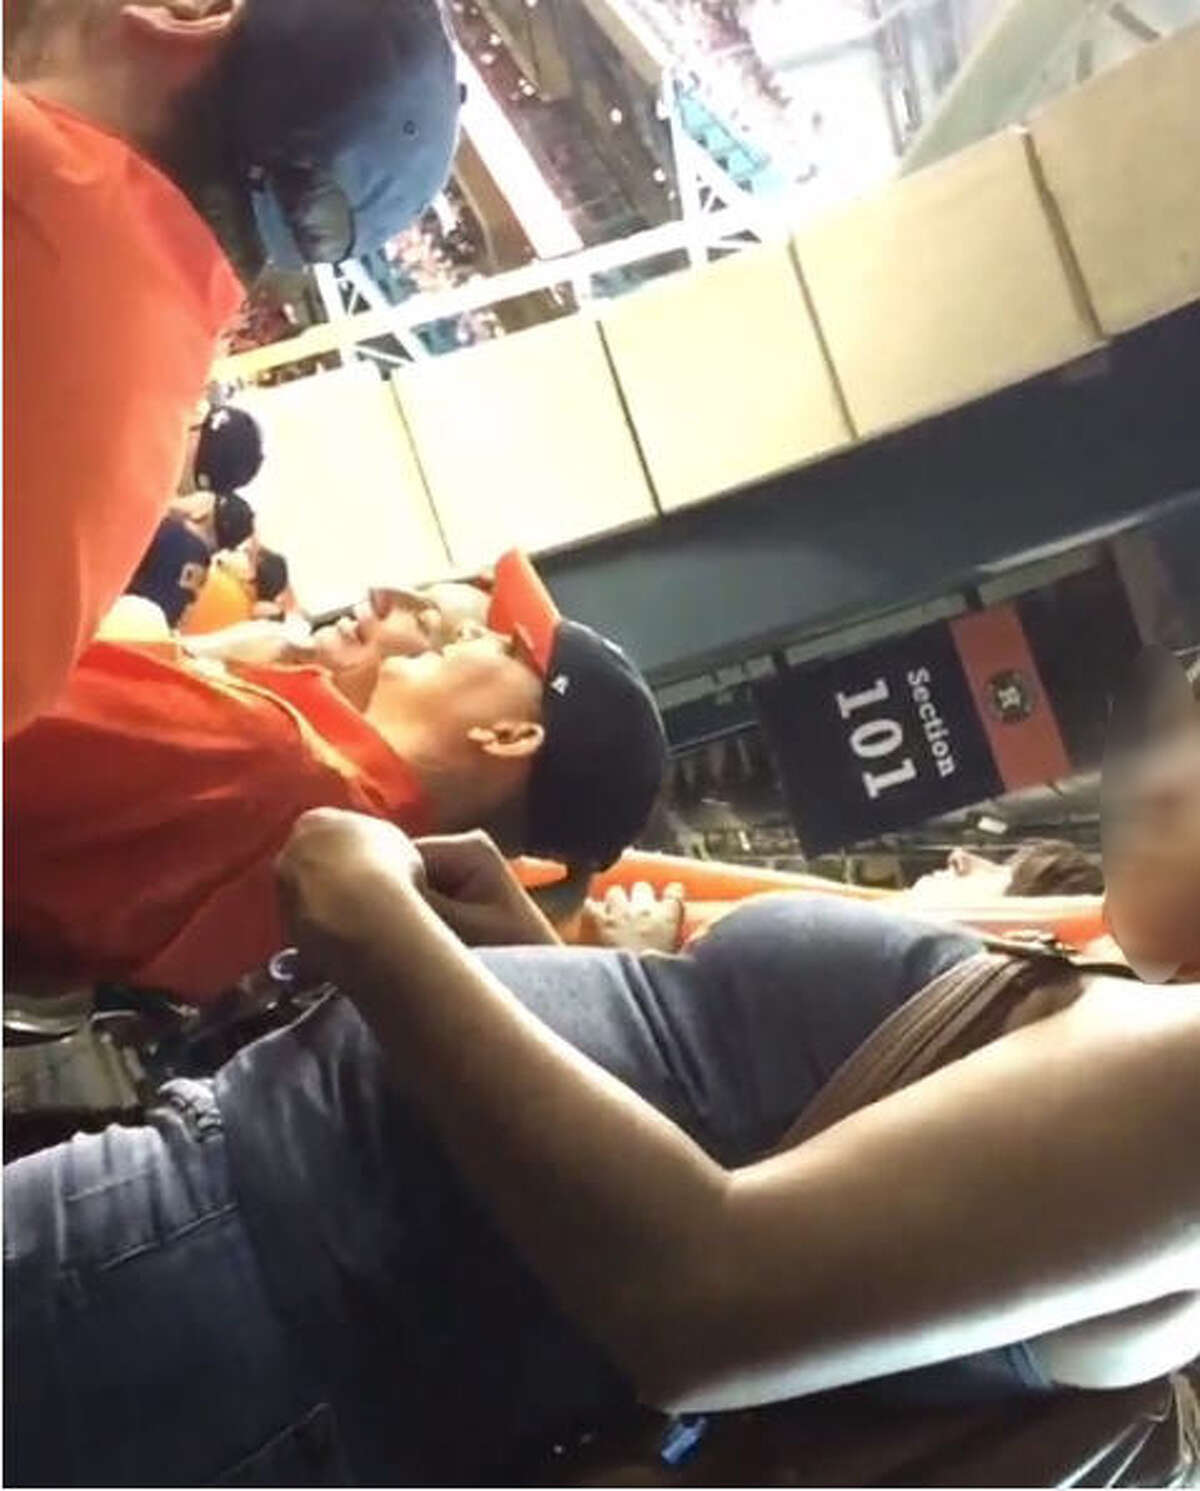 A short video posted by UFC fighter/baseball fan Derrick "the Beast" Lewis appears to show a woman in section 101 of Minute Maid Ballpark snorting something during the Houston Astros' Oct. 11 ALDS game versus the Kansas City Royals. The video raised eyebrows around the internet.